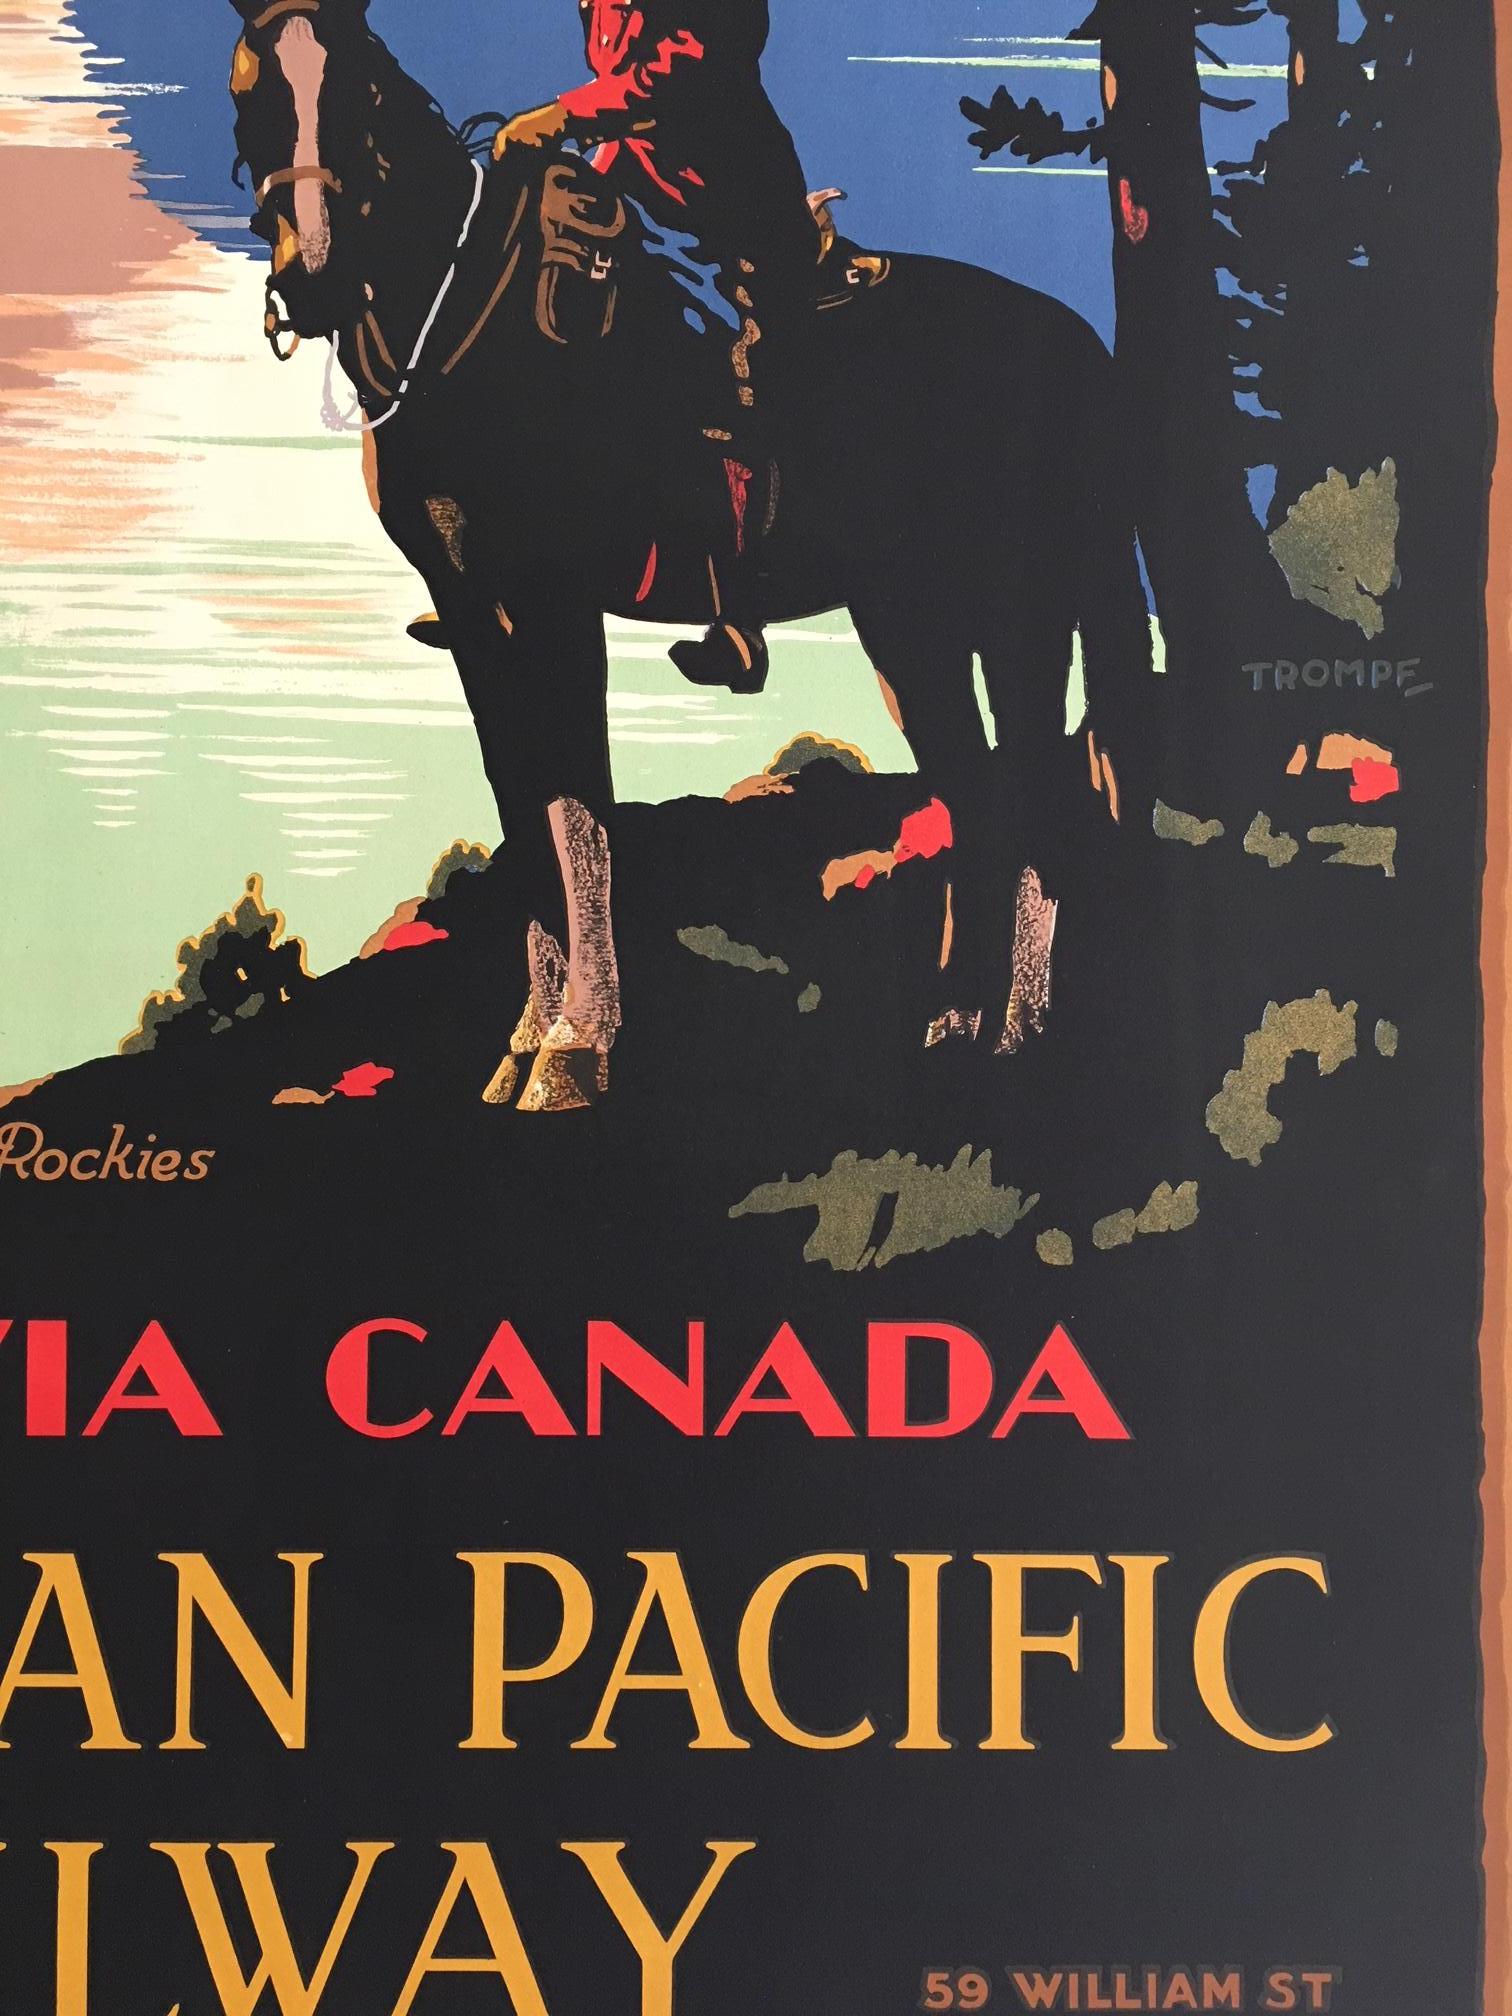 Unknown Home Via Canada Canadian Pacific, Original Vintage Poster by Trompf, 1930s